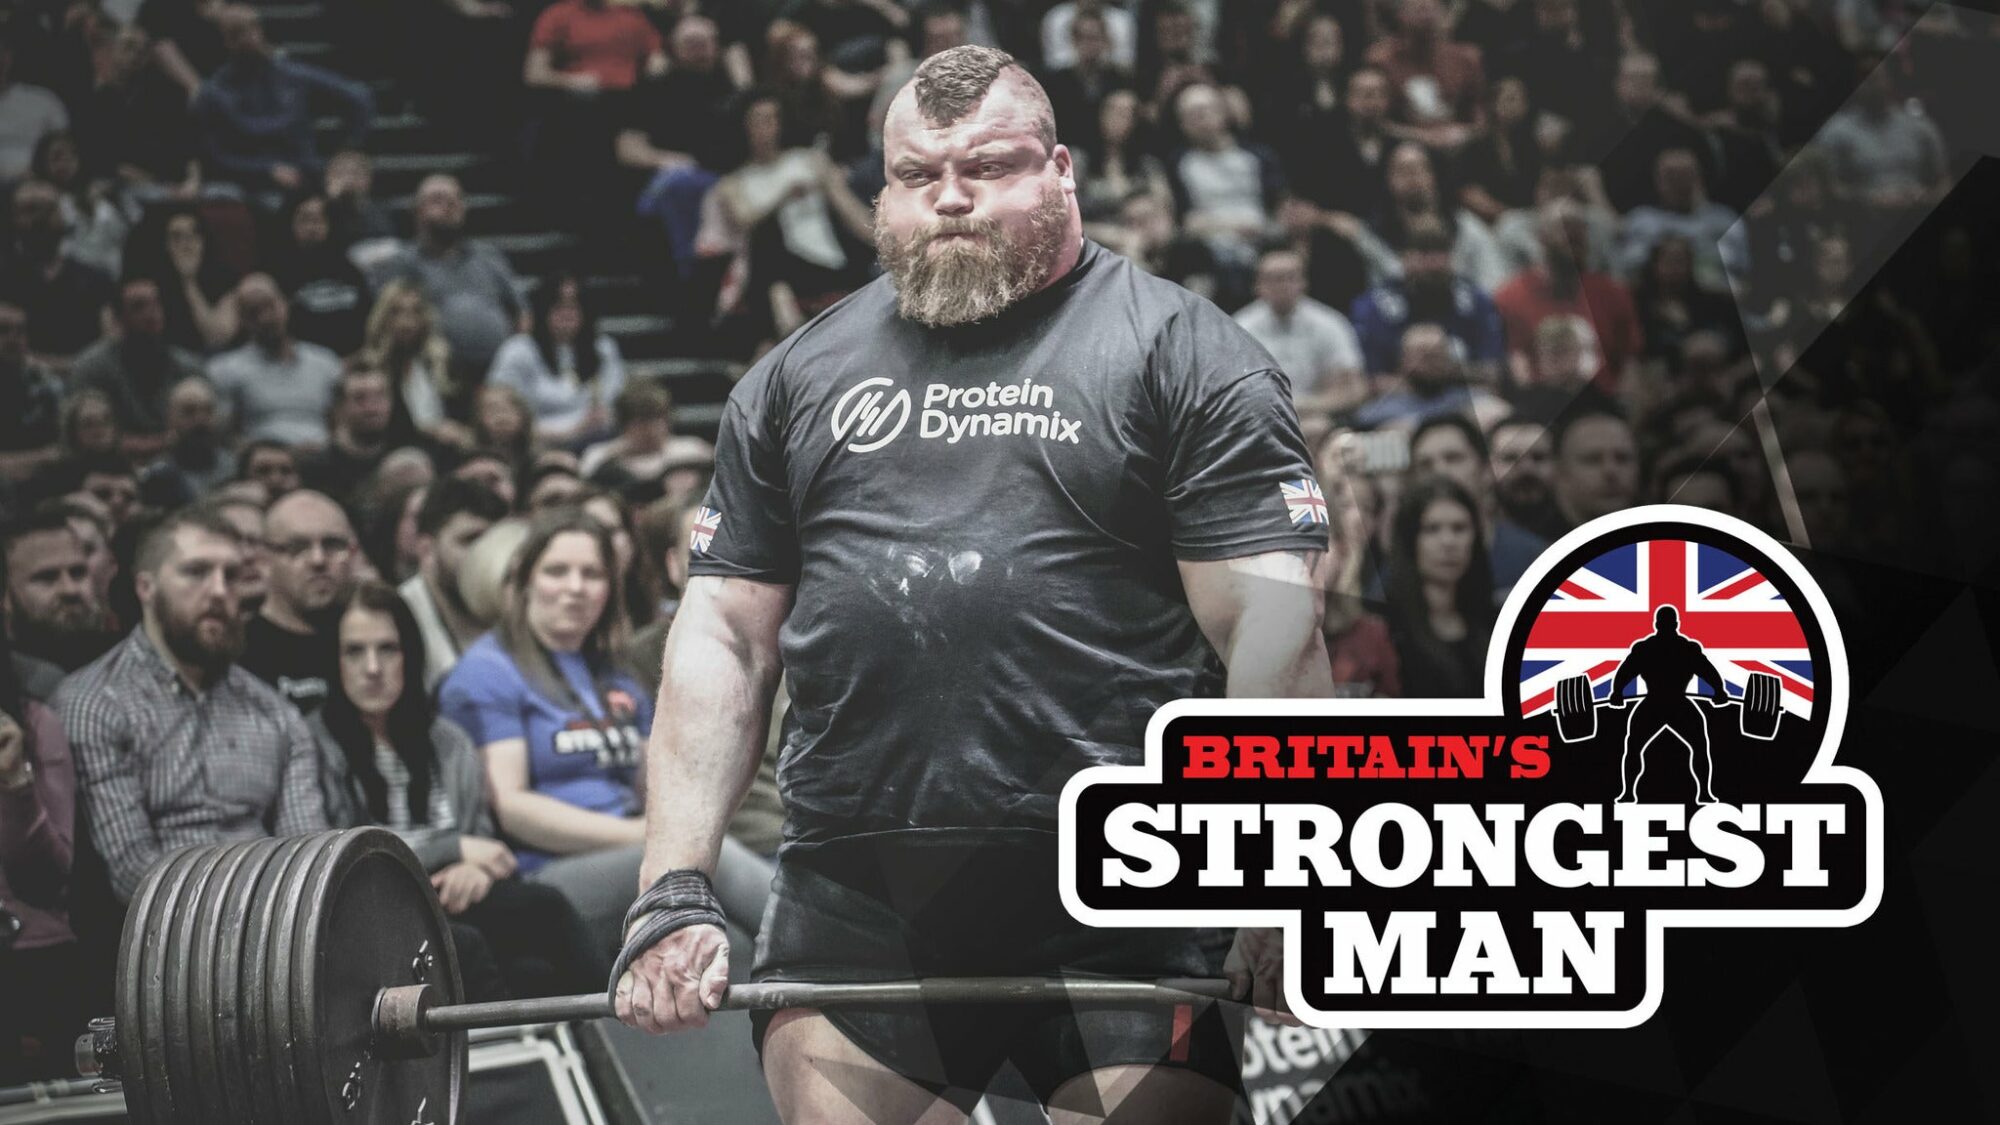 Image name Britains Strongest Man Hospitality Experiences at Utilita Arena Sheffield Sheffield the 6 image from the post Events in Yorkshire.com.